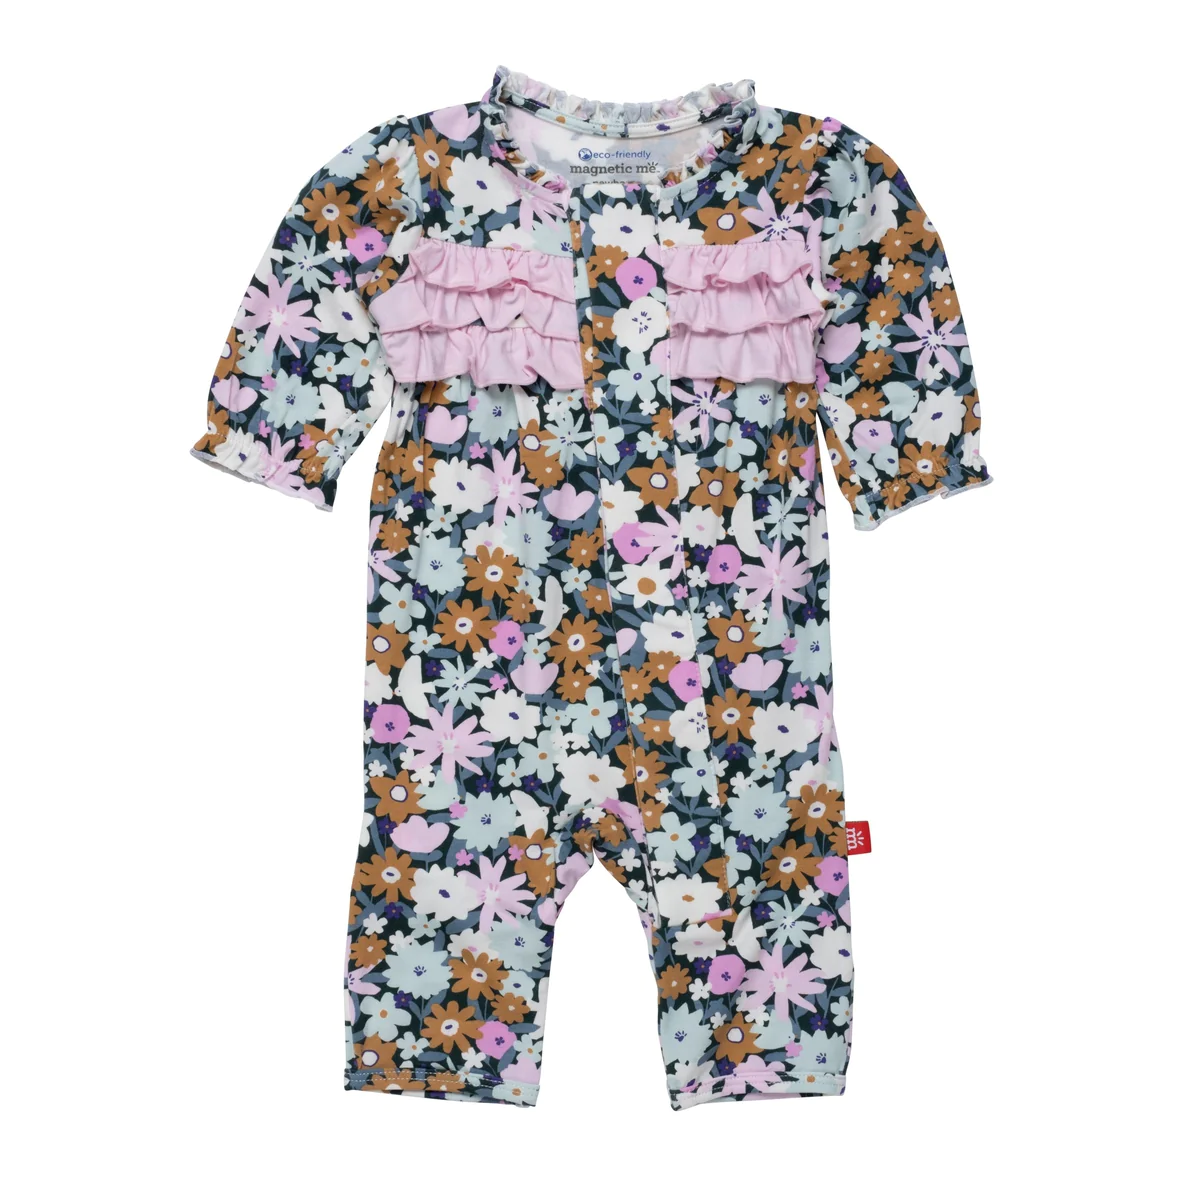 Finchley Ruffle Coverall - Magnetic Me